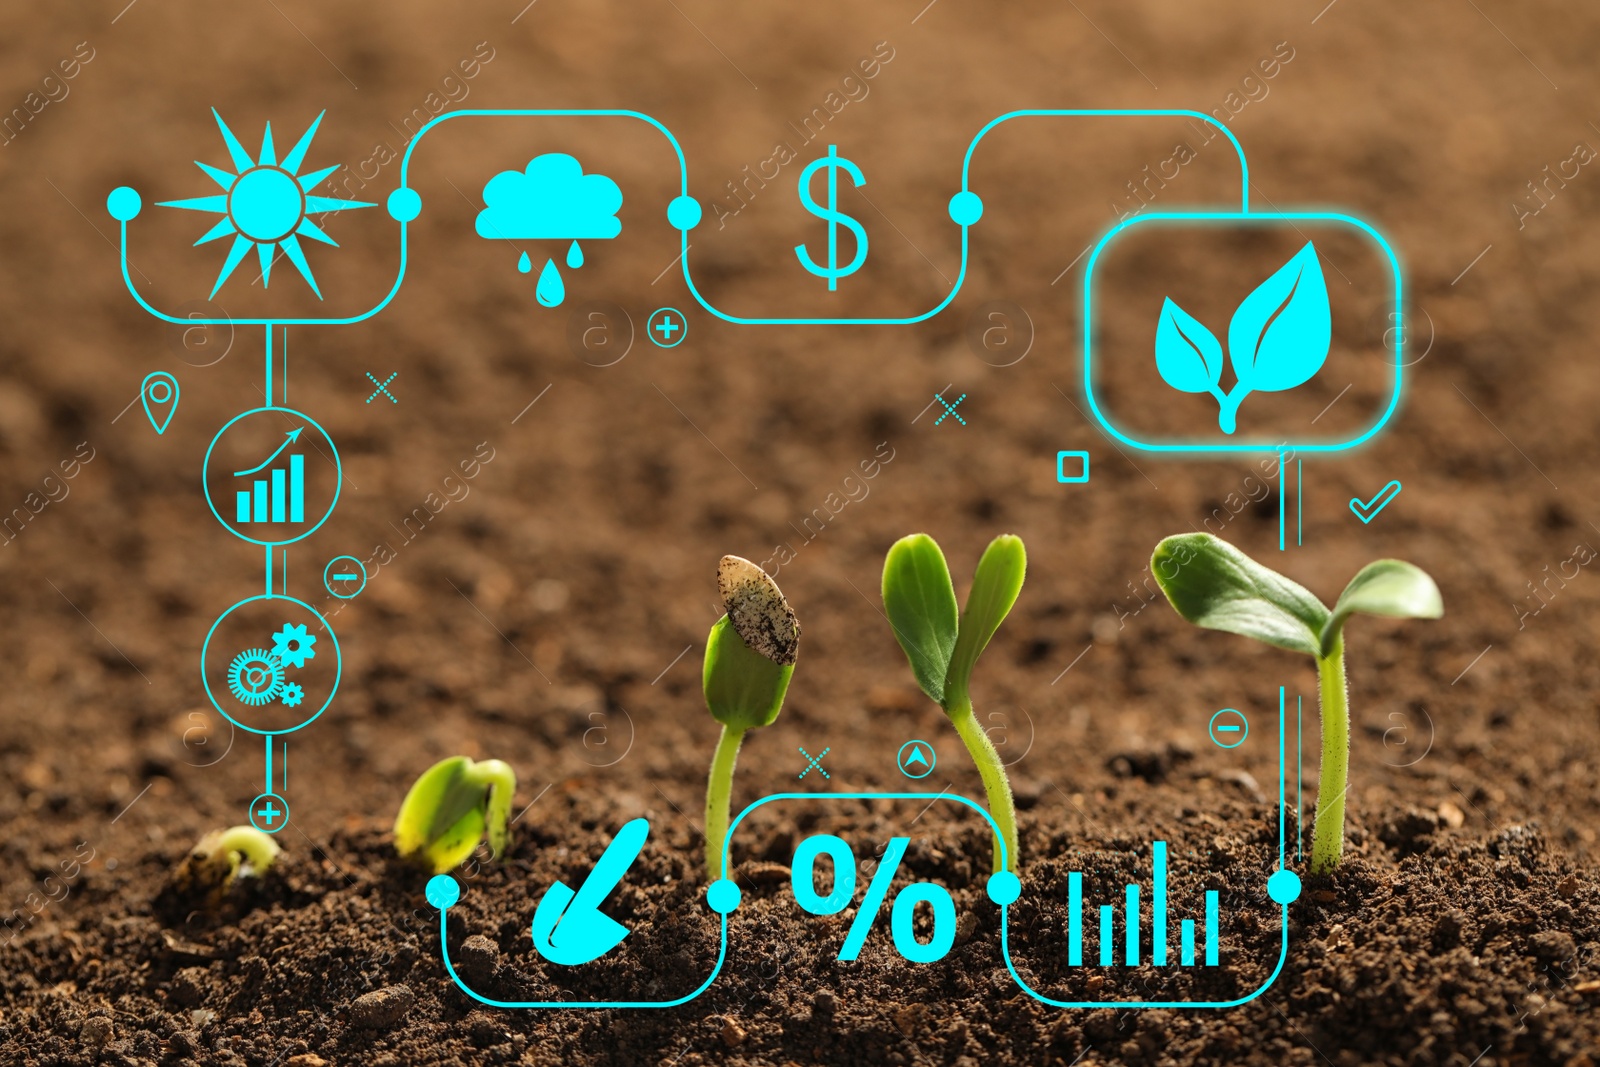 Image of Modern technology in agriculture. Green seedlings and icons